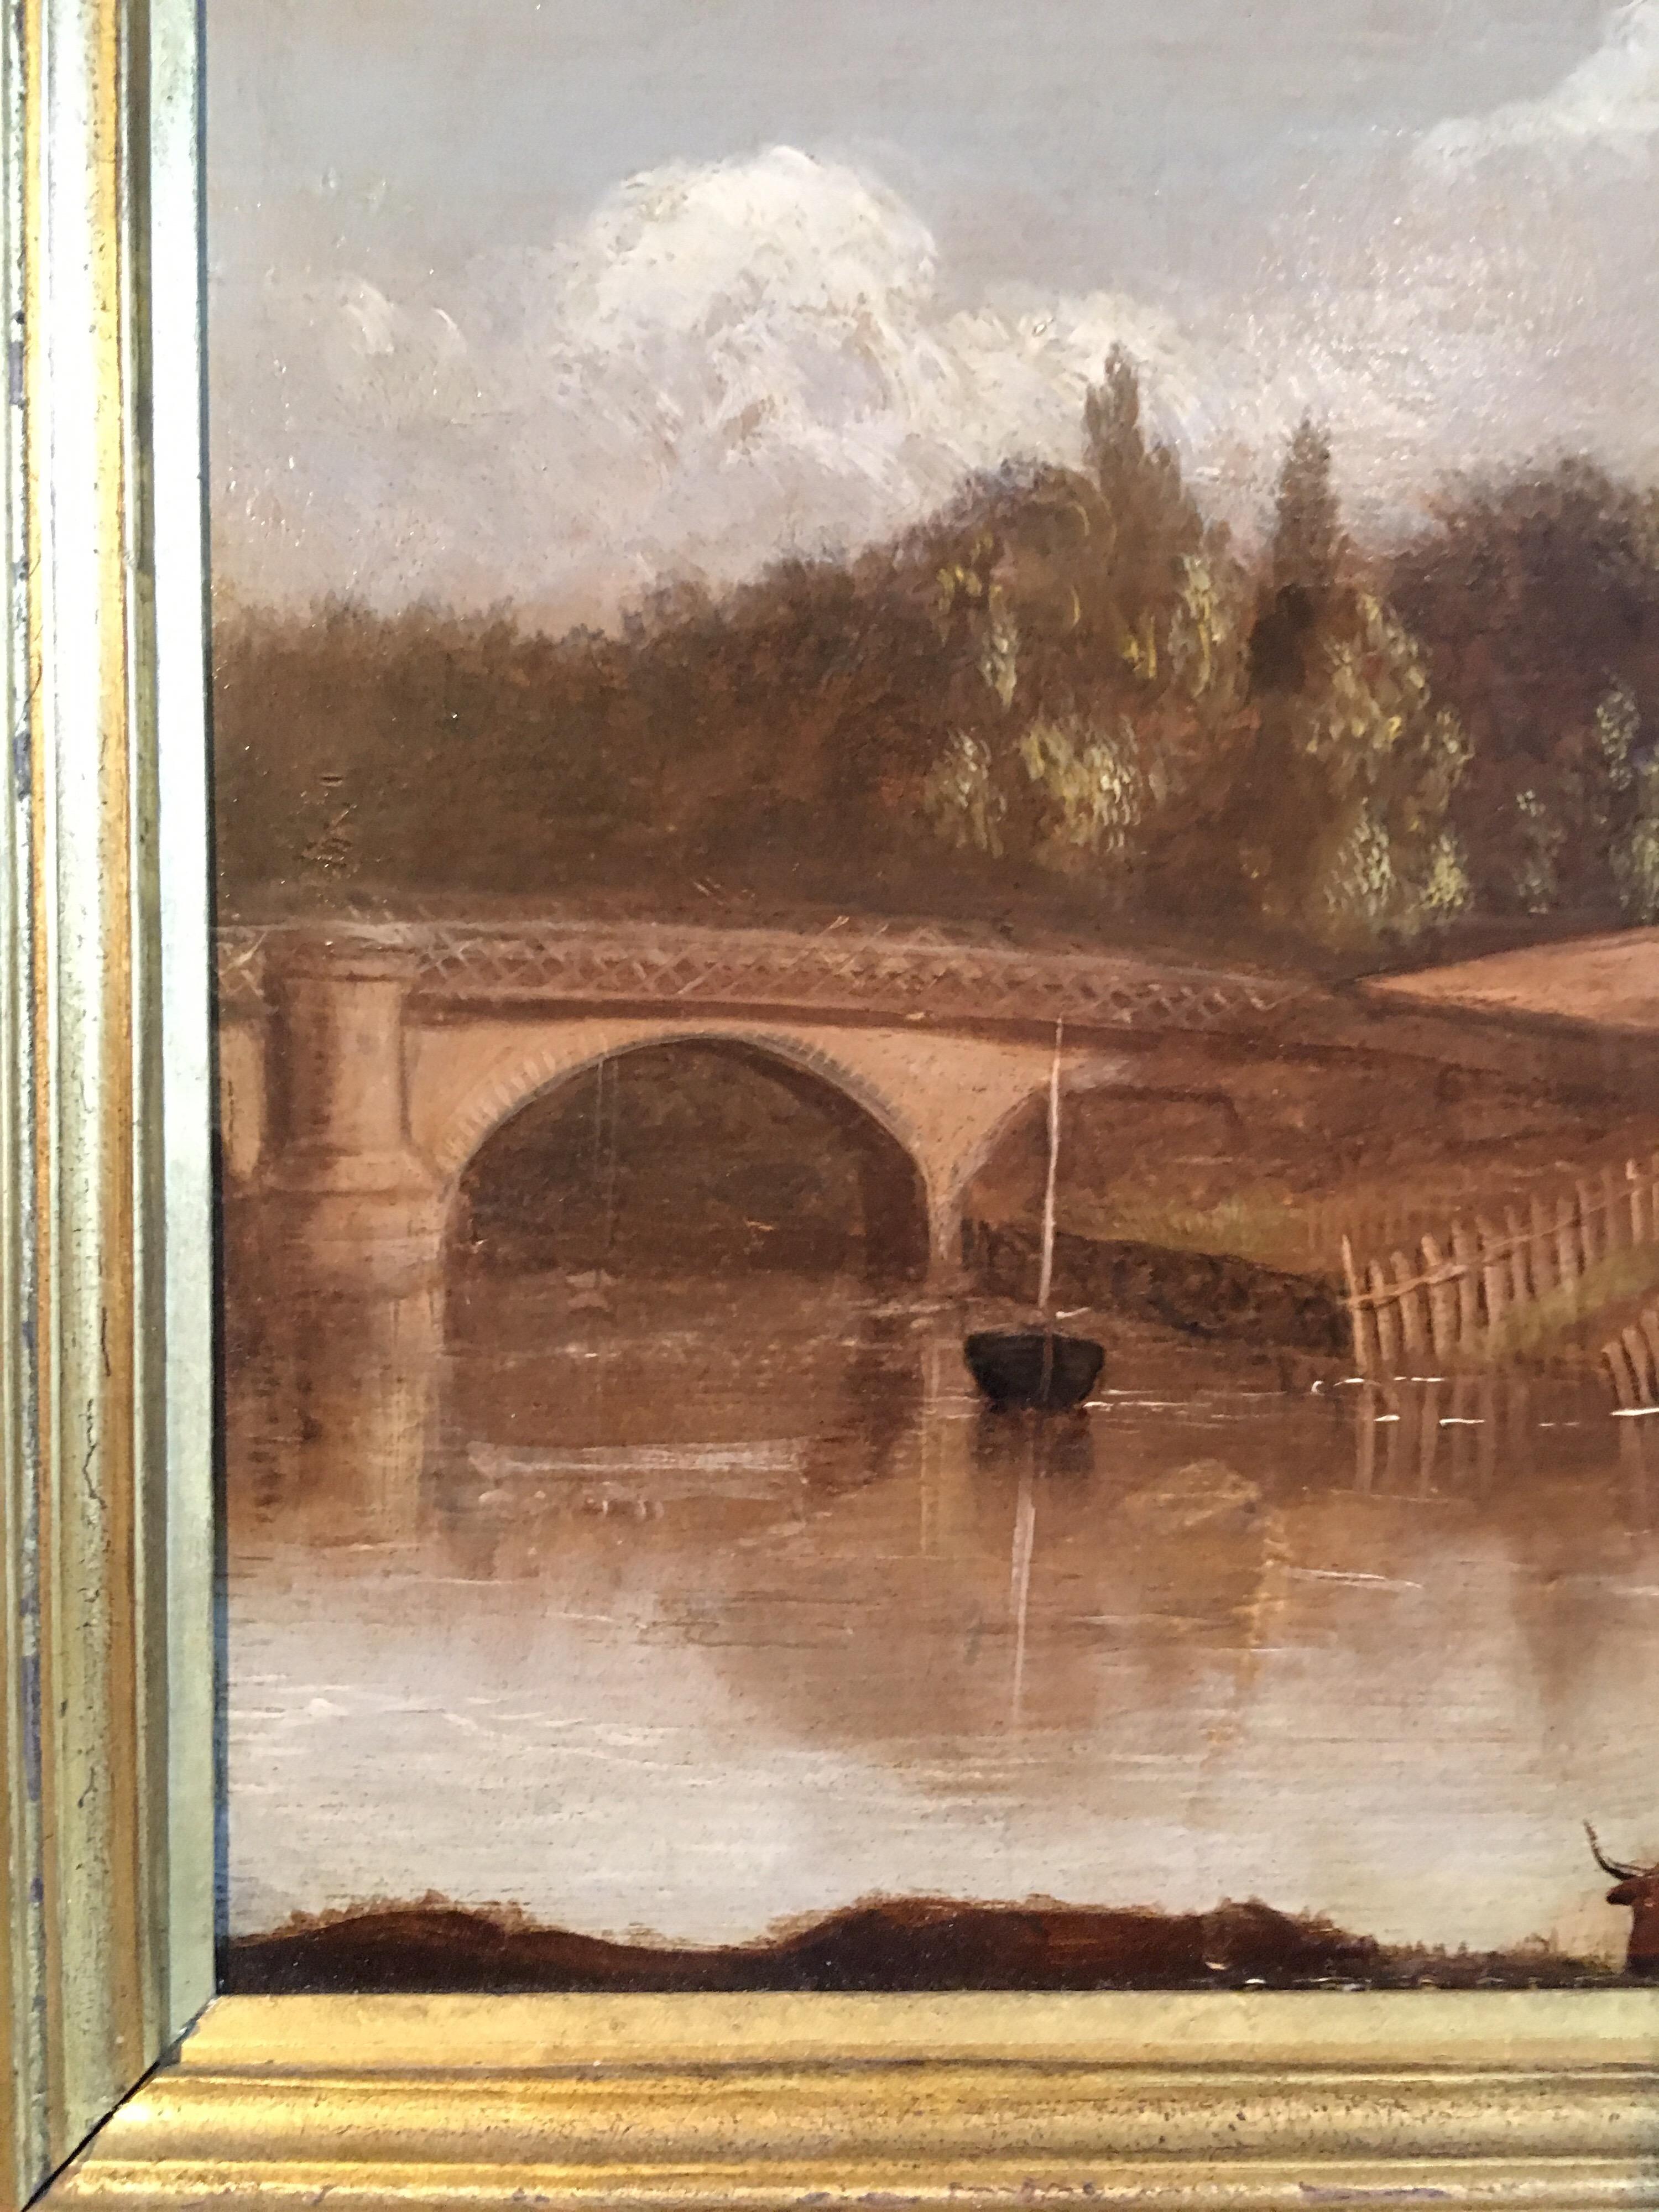 Under the Bridge, Victorian Landscape Oil Painting 
British School, 19th century
Oil painting on board, framed
Framed size: 13 x 16 inches

Tranquil scene of a wide stream, and a lonesome cow drinking from the water. The stream has a fenced area